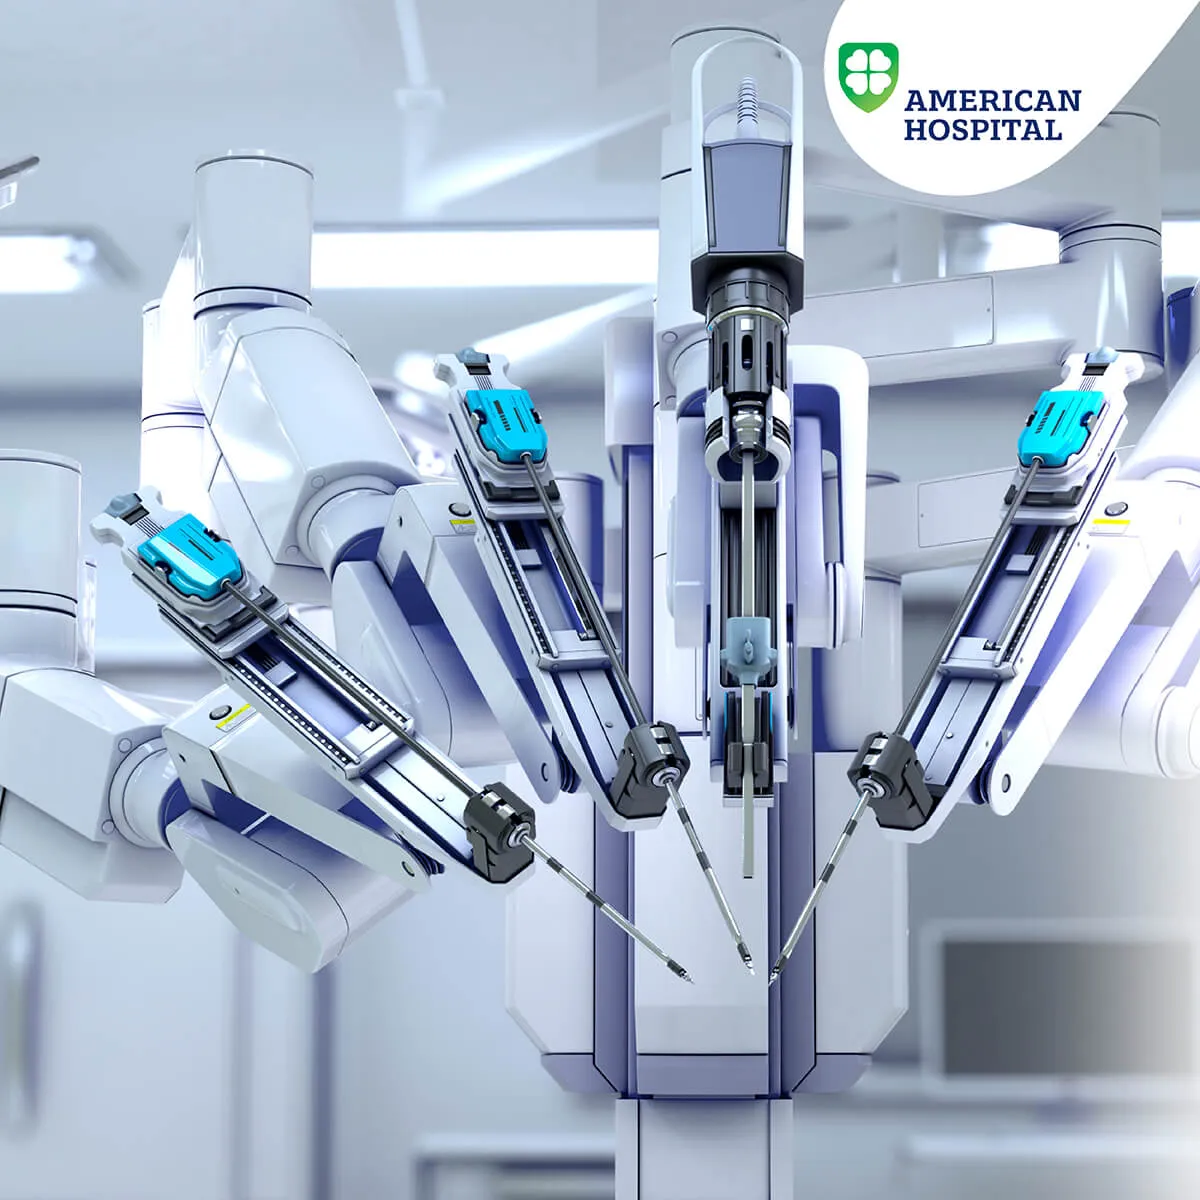 American Hospital Recognized for Excellence with over 100 Successful Robotic Surgeries